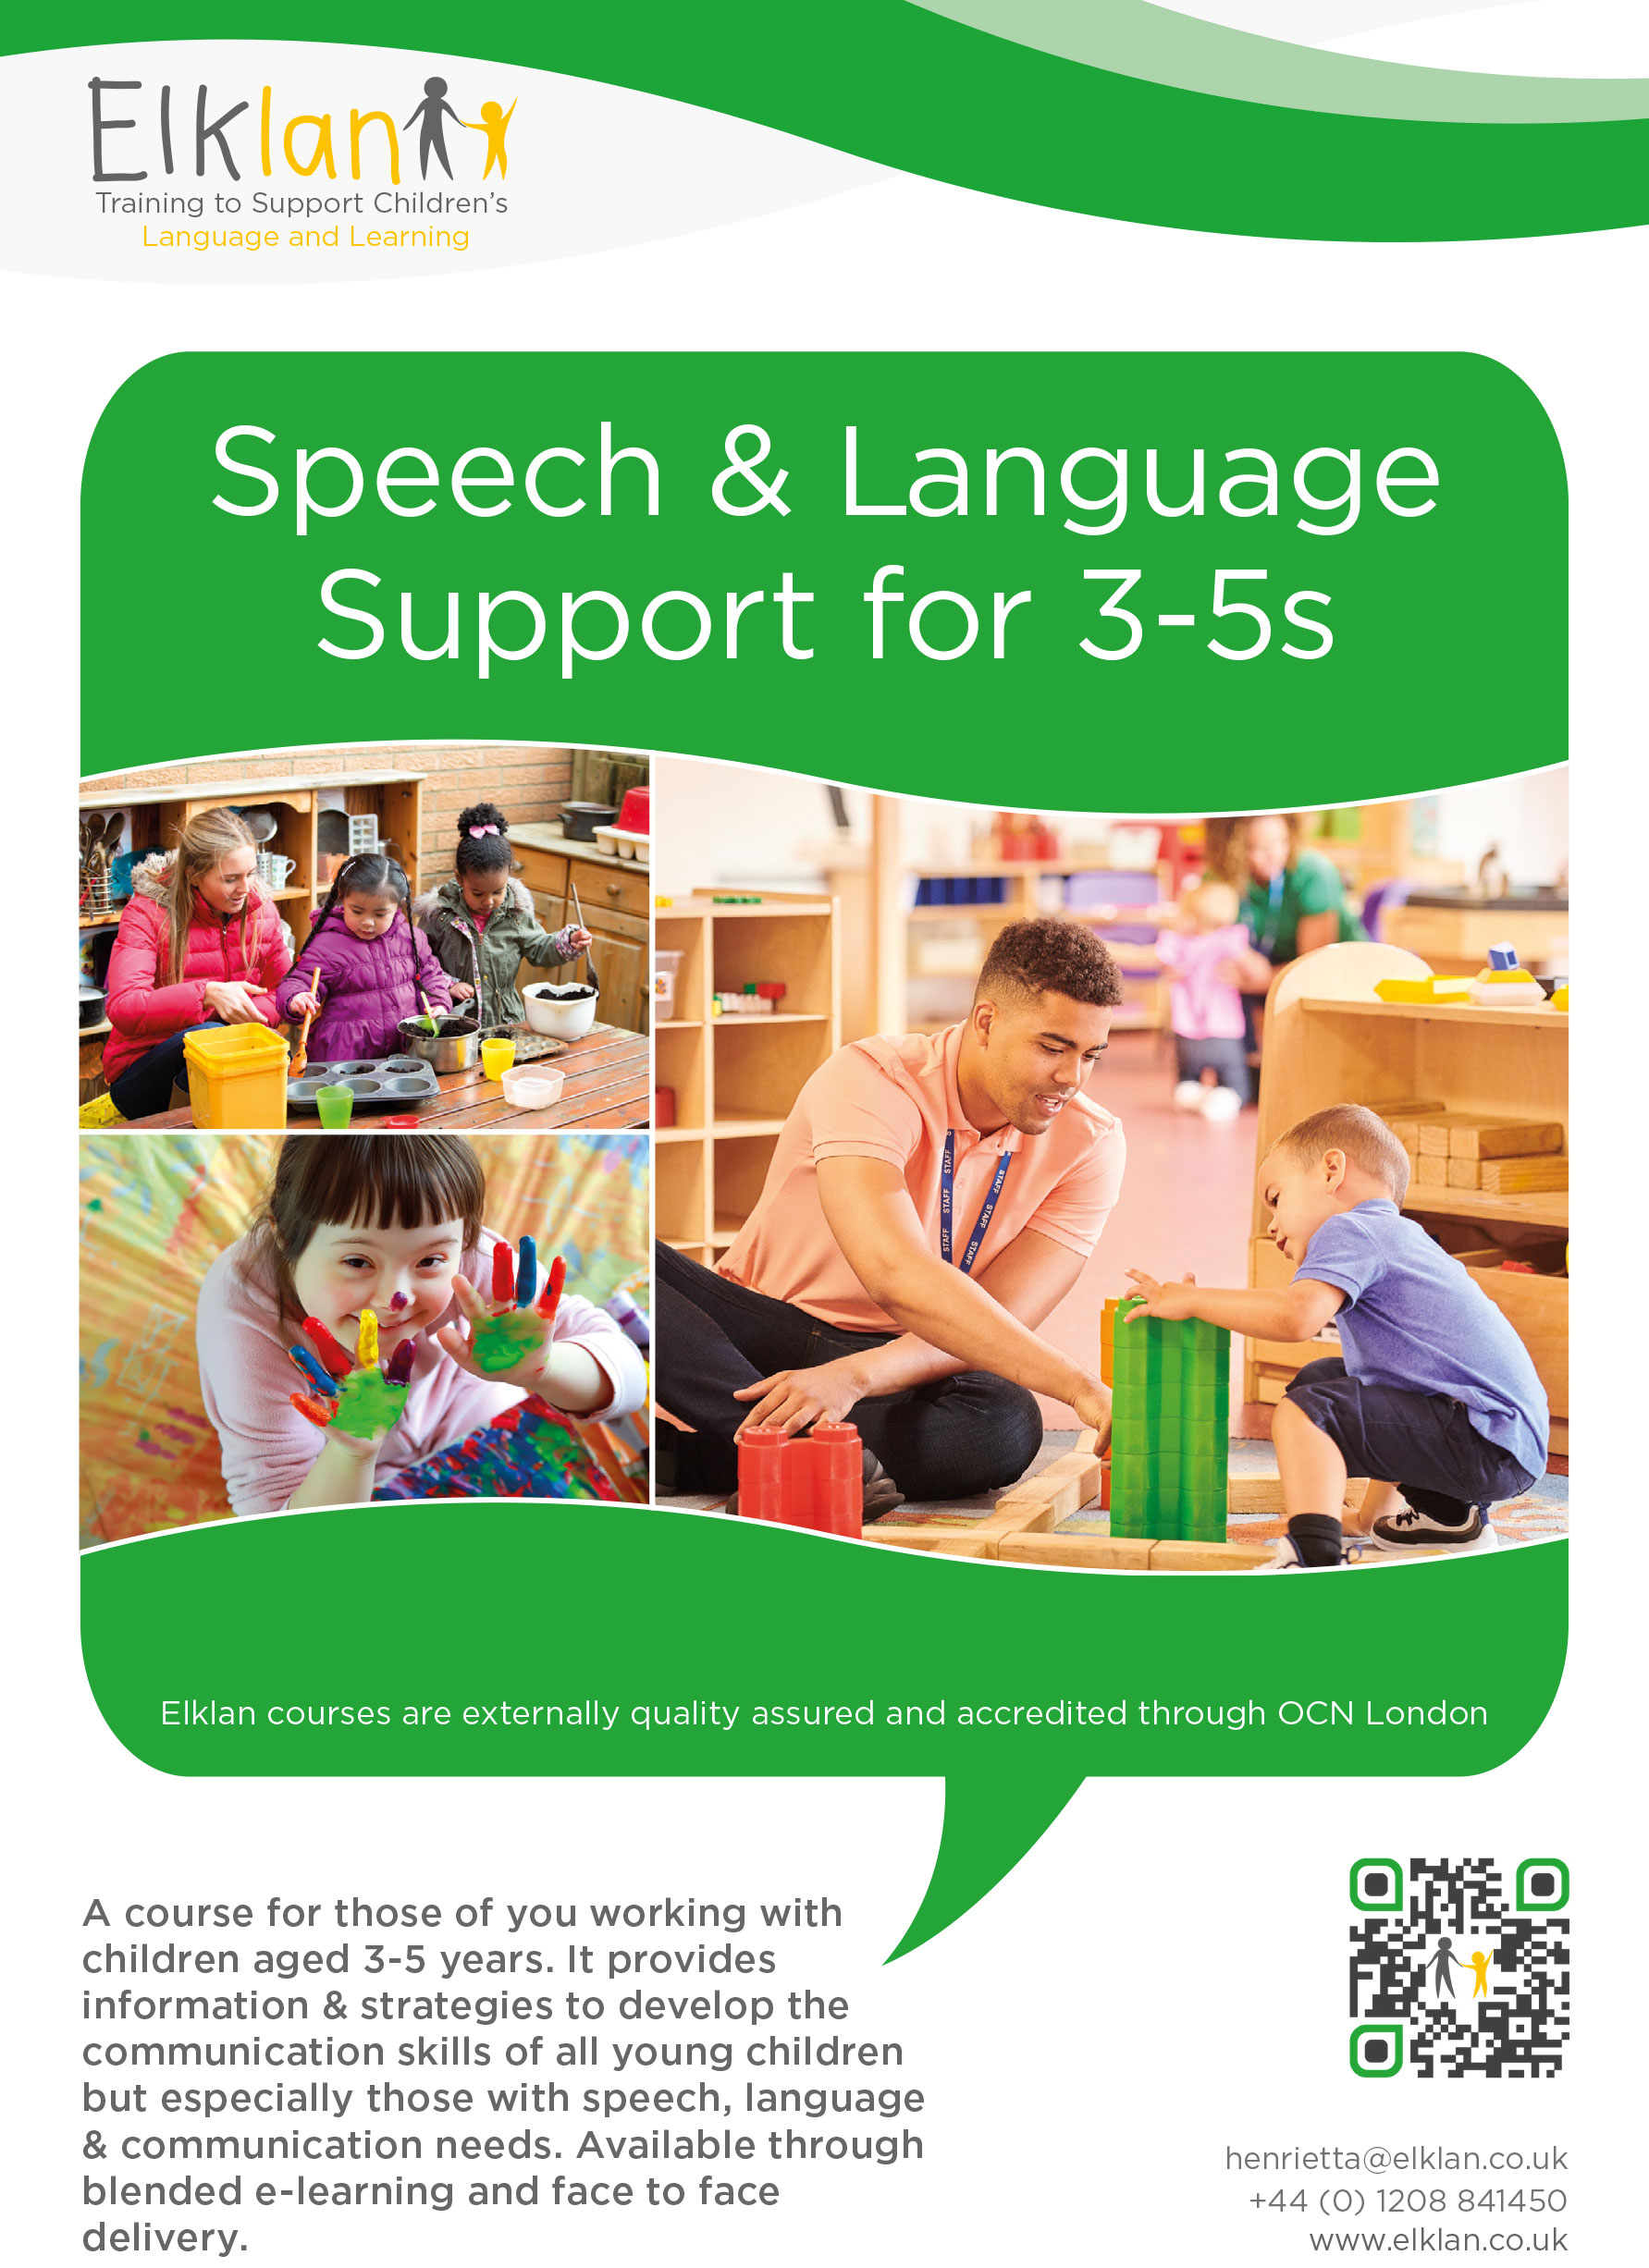 Speech and Language Support for 3-5s flyer - 100 copies